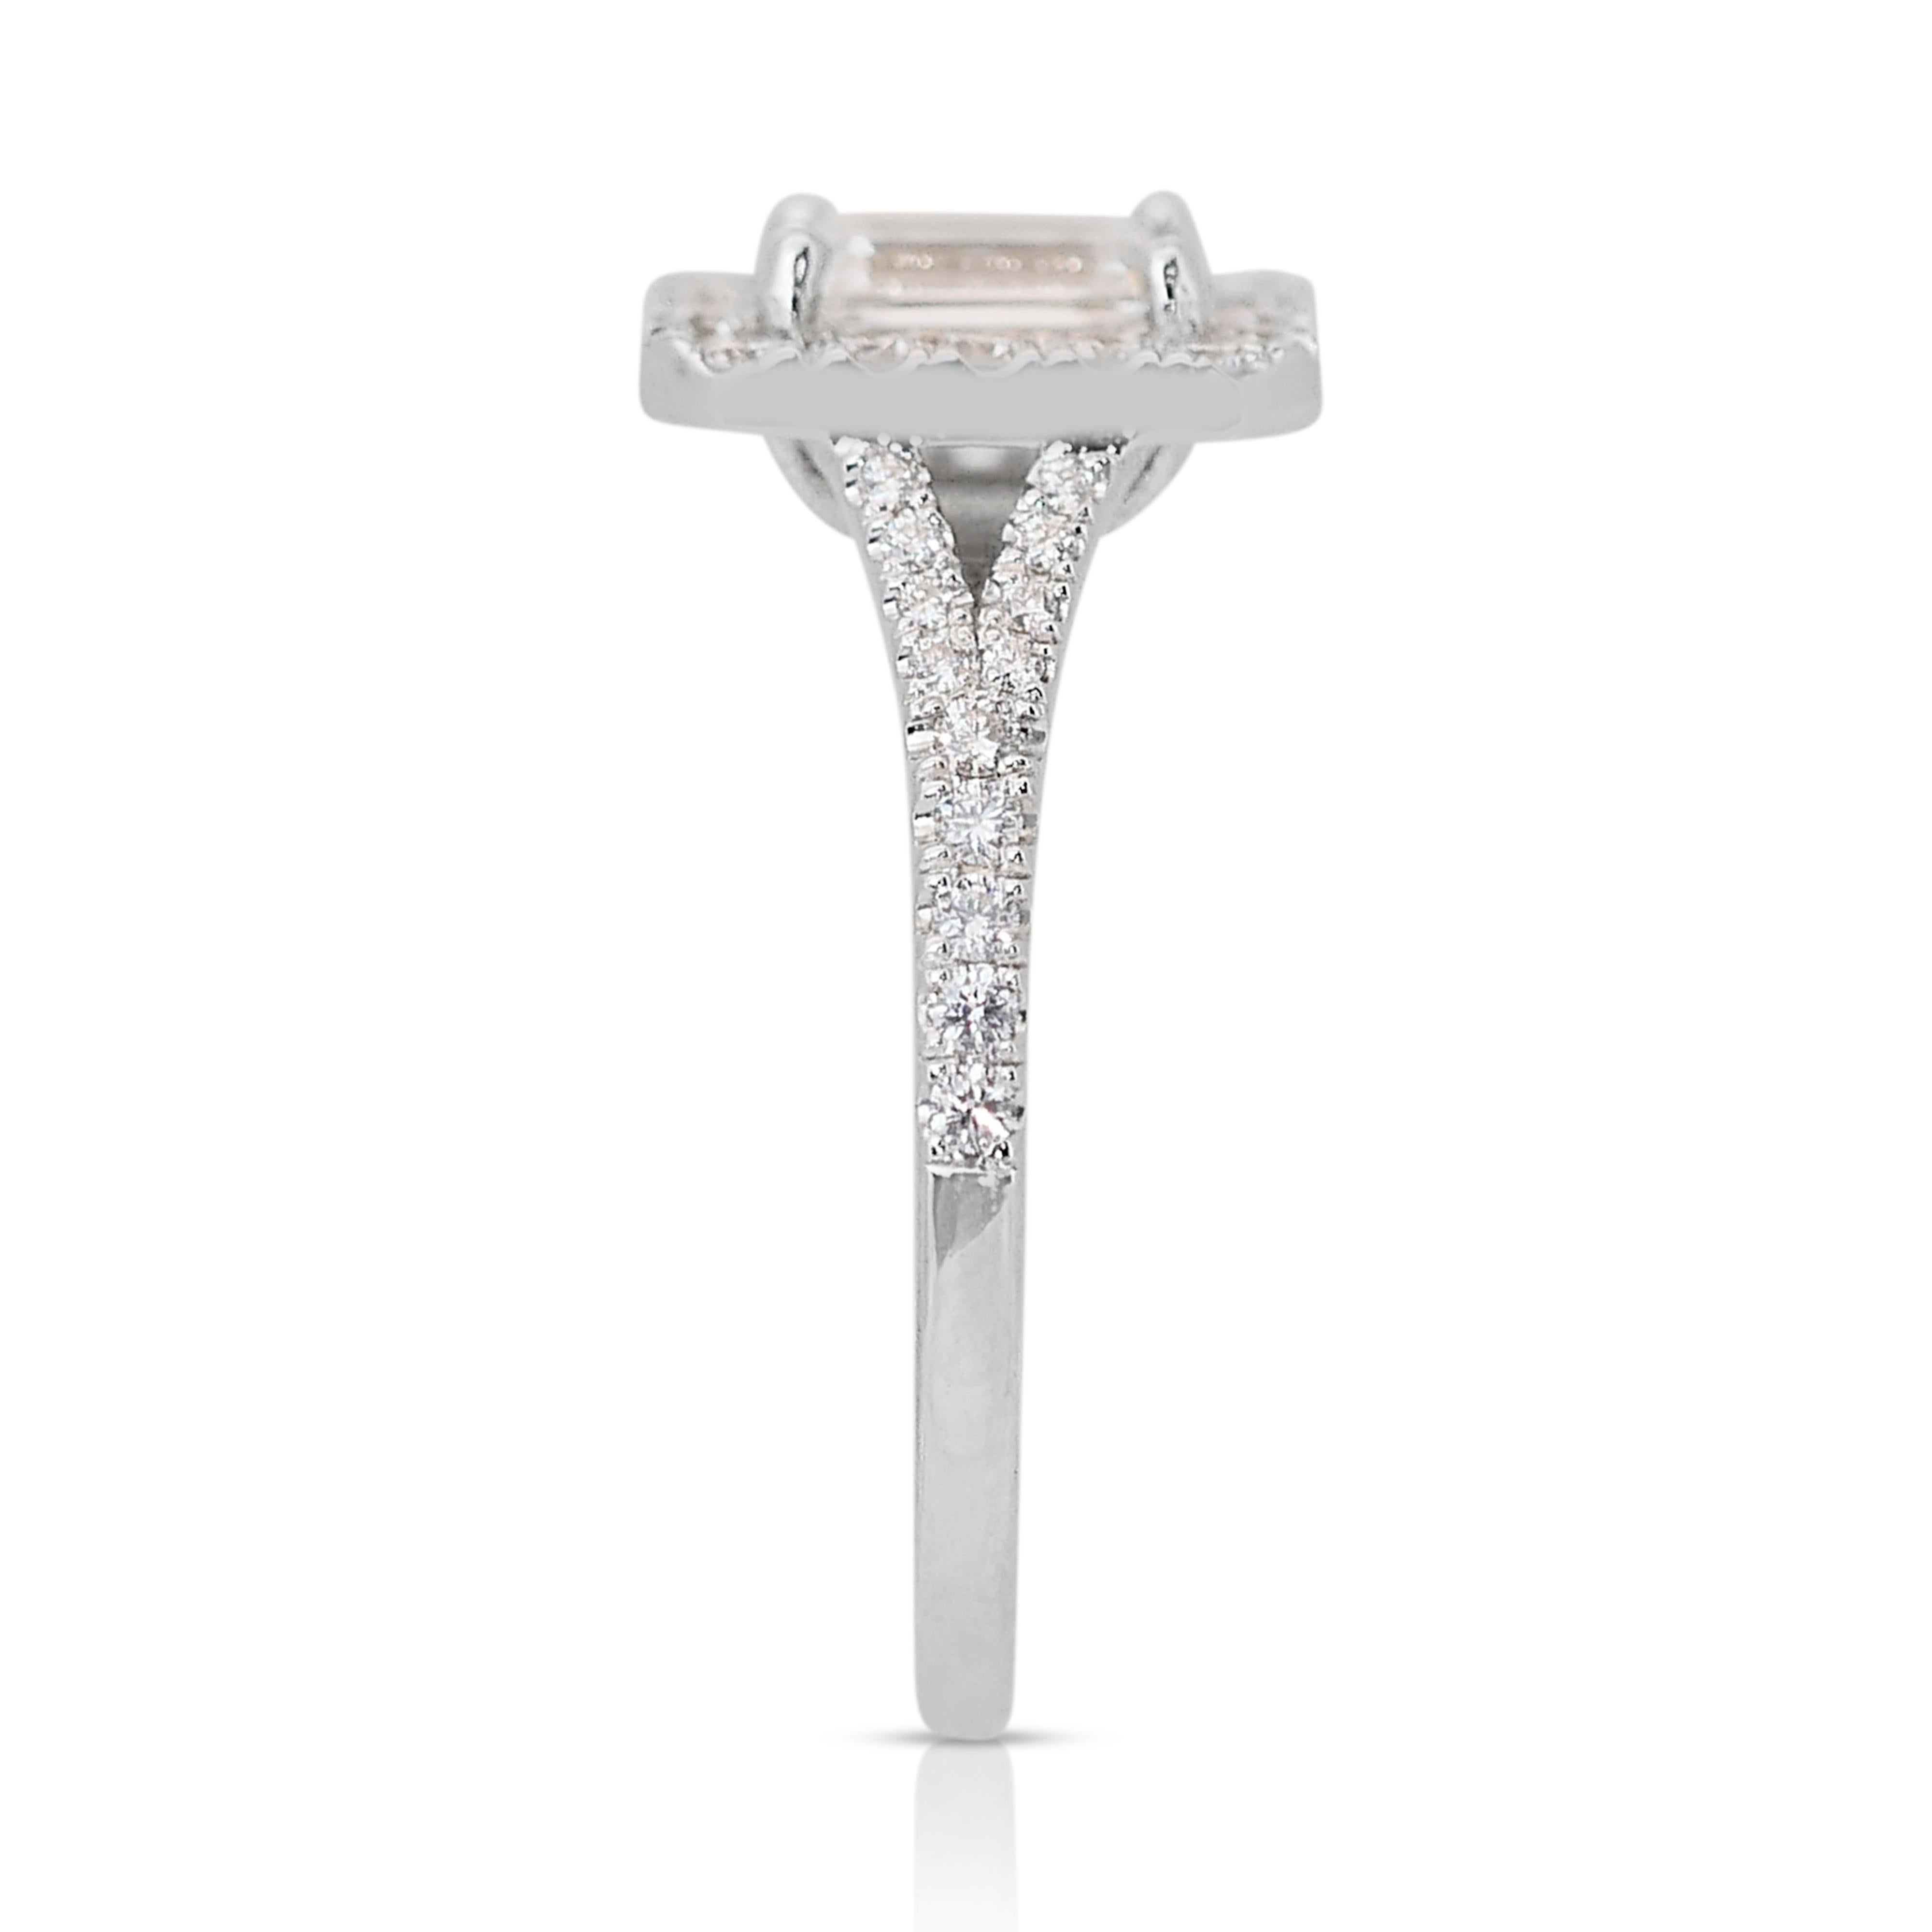 Captivating 1.15ct Emerald-Cut Diamond Halo Ring in 18k White Gold - GIA  For Sale 2